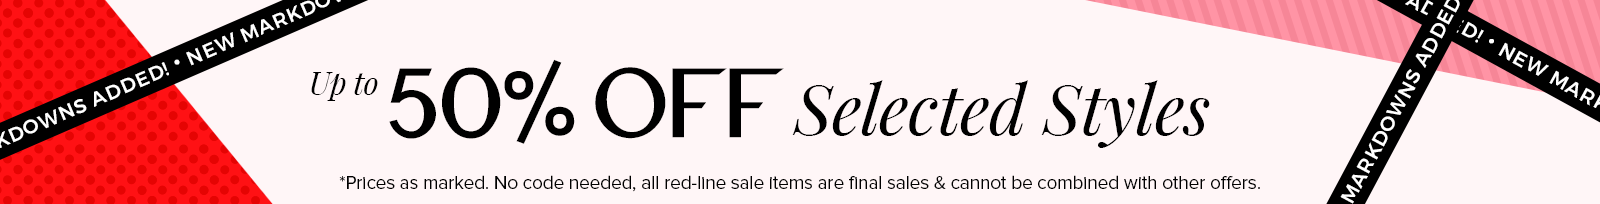 Up to 50% Off Markdowns